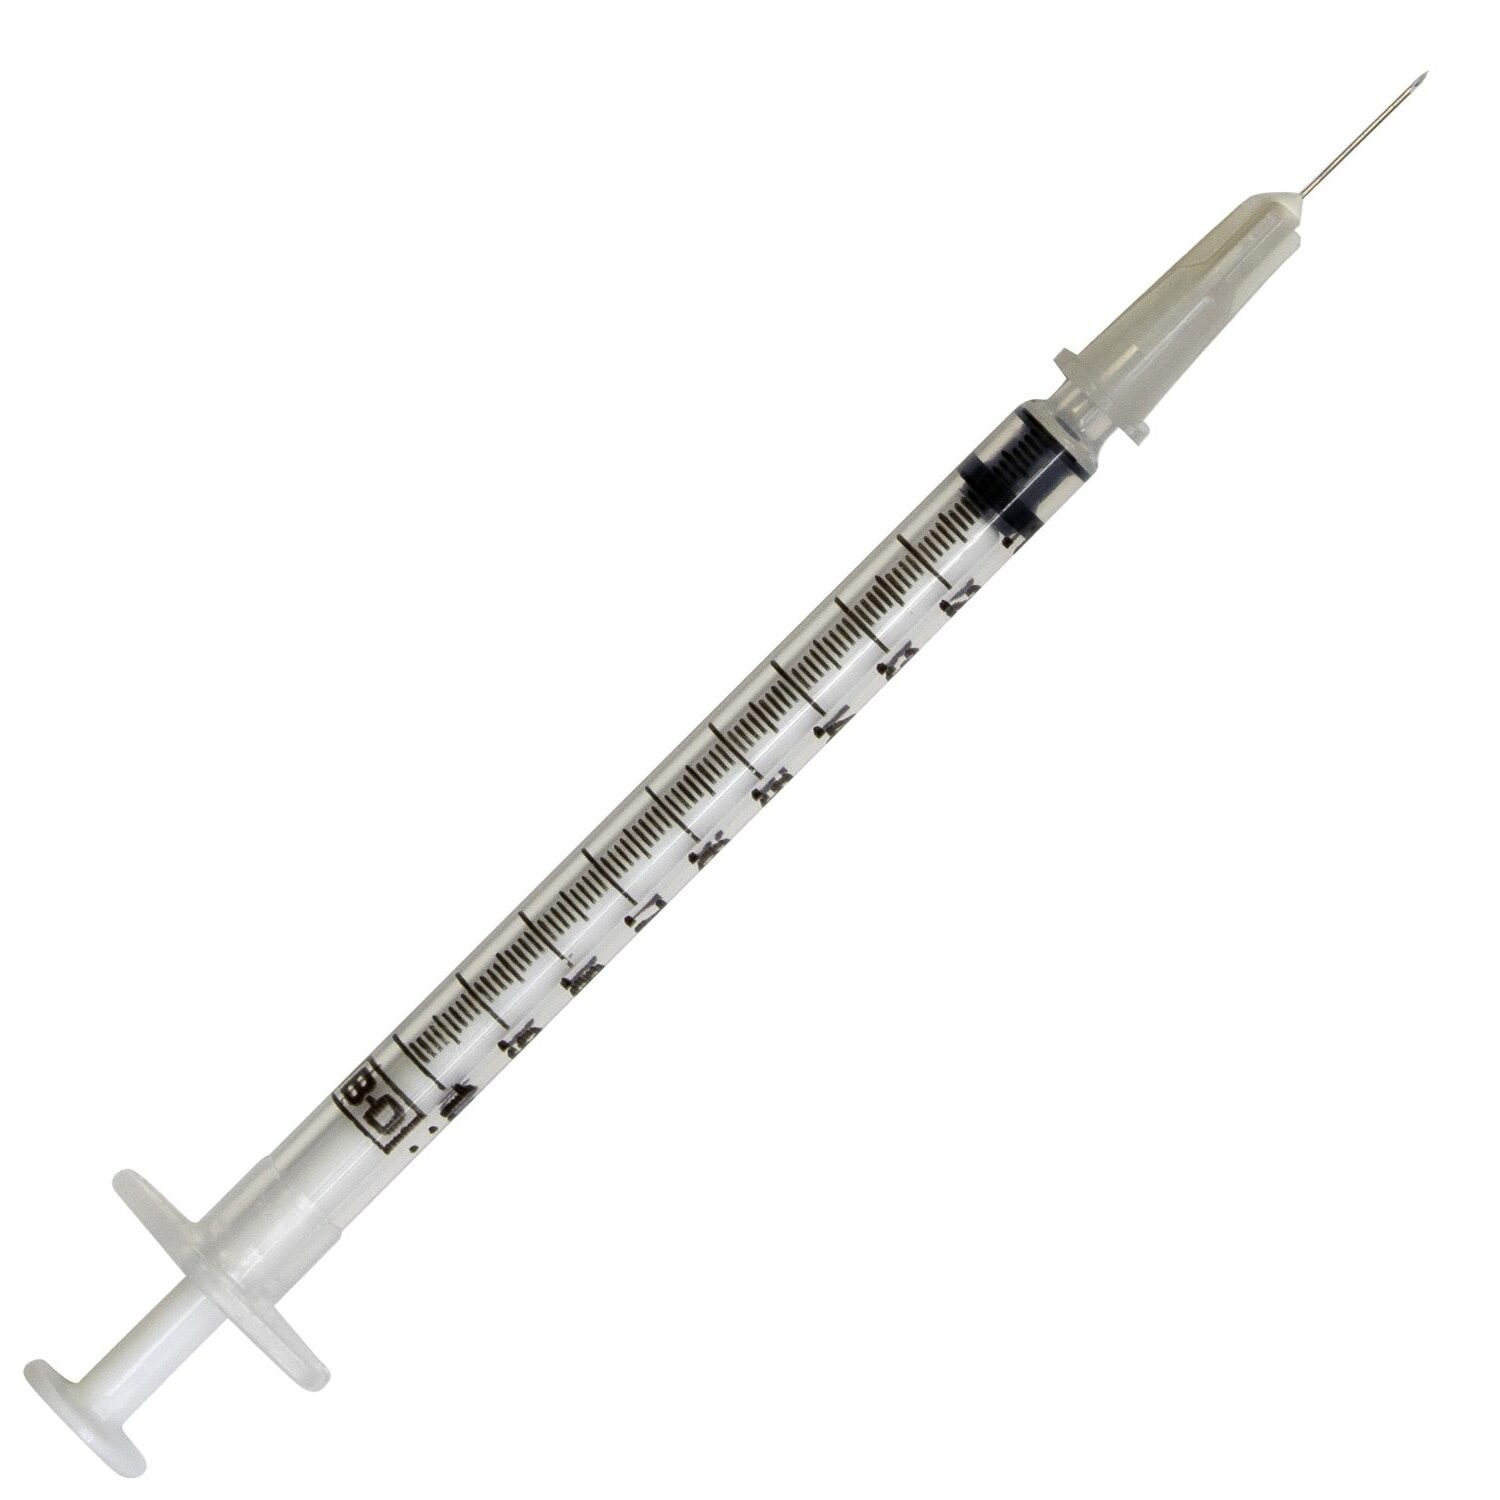 BD PrecisionGlide Tuberculin Syringe with Detachable Needle 1 mL, 25 G x  5/8 Inch (Pack of 100)